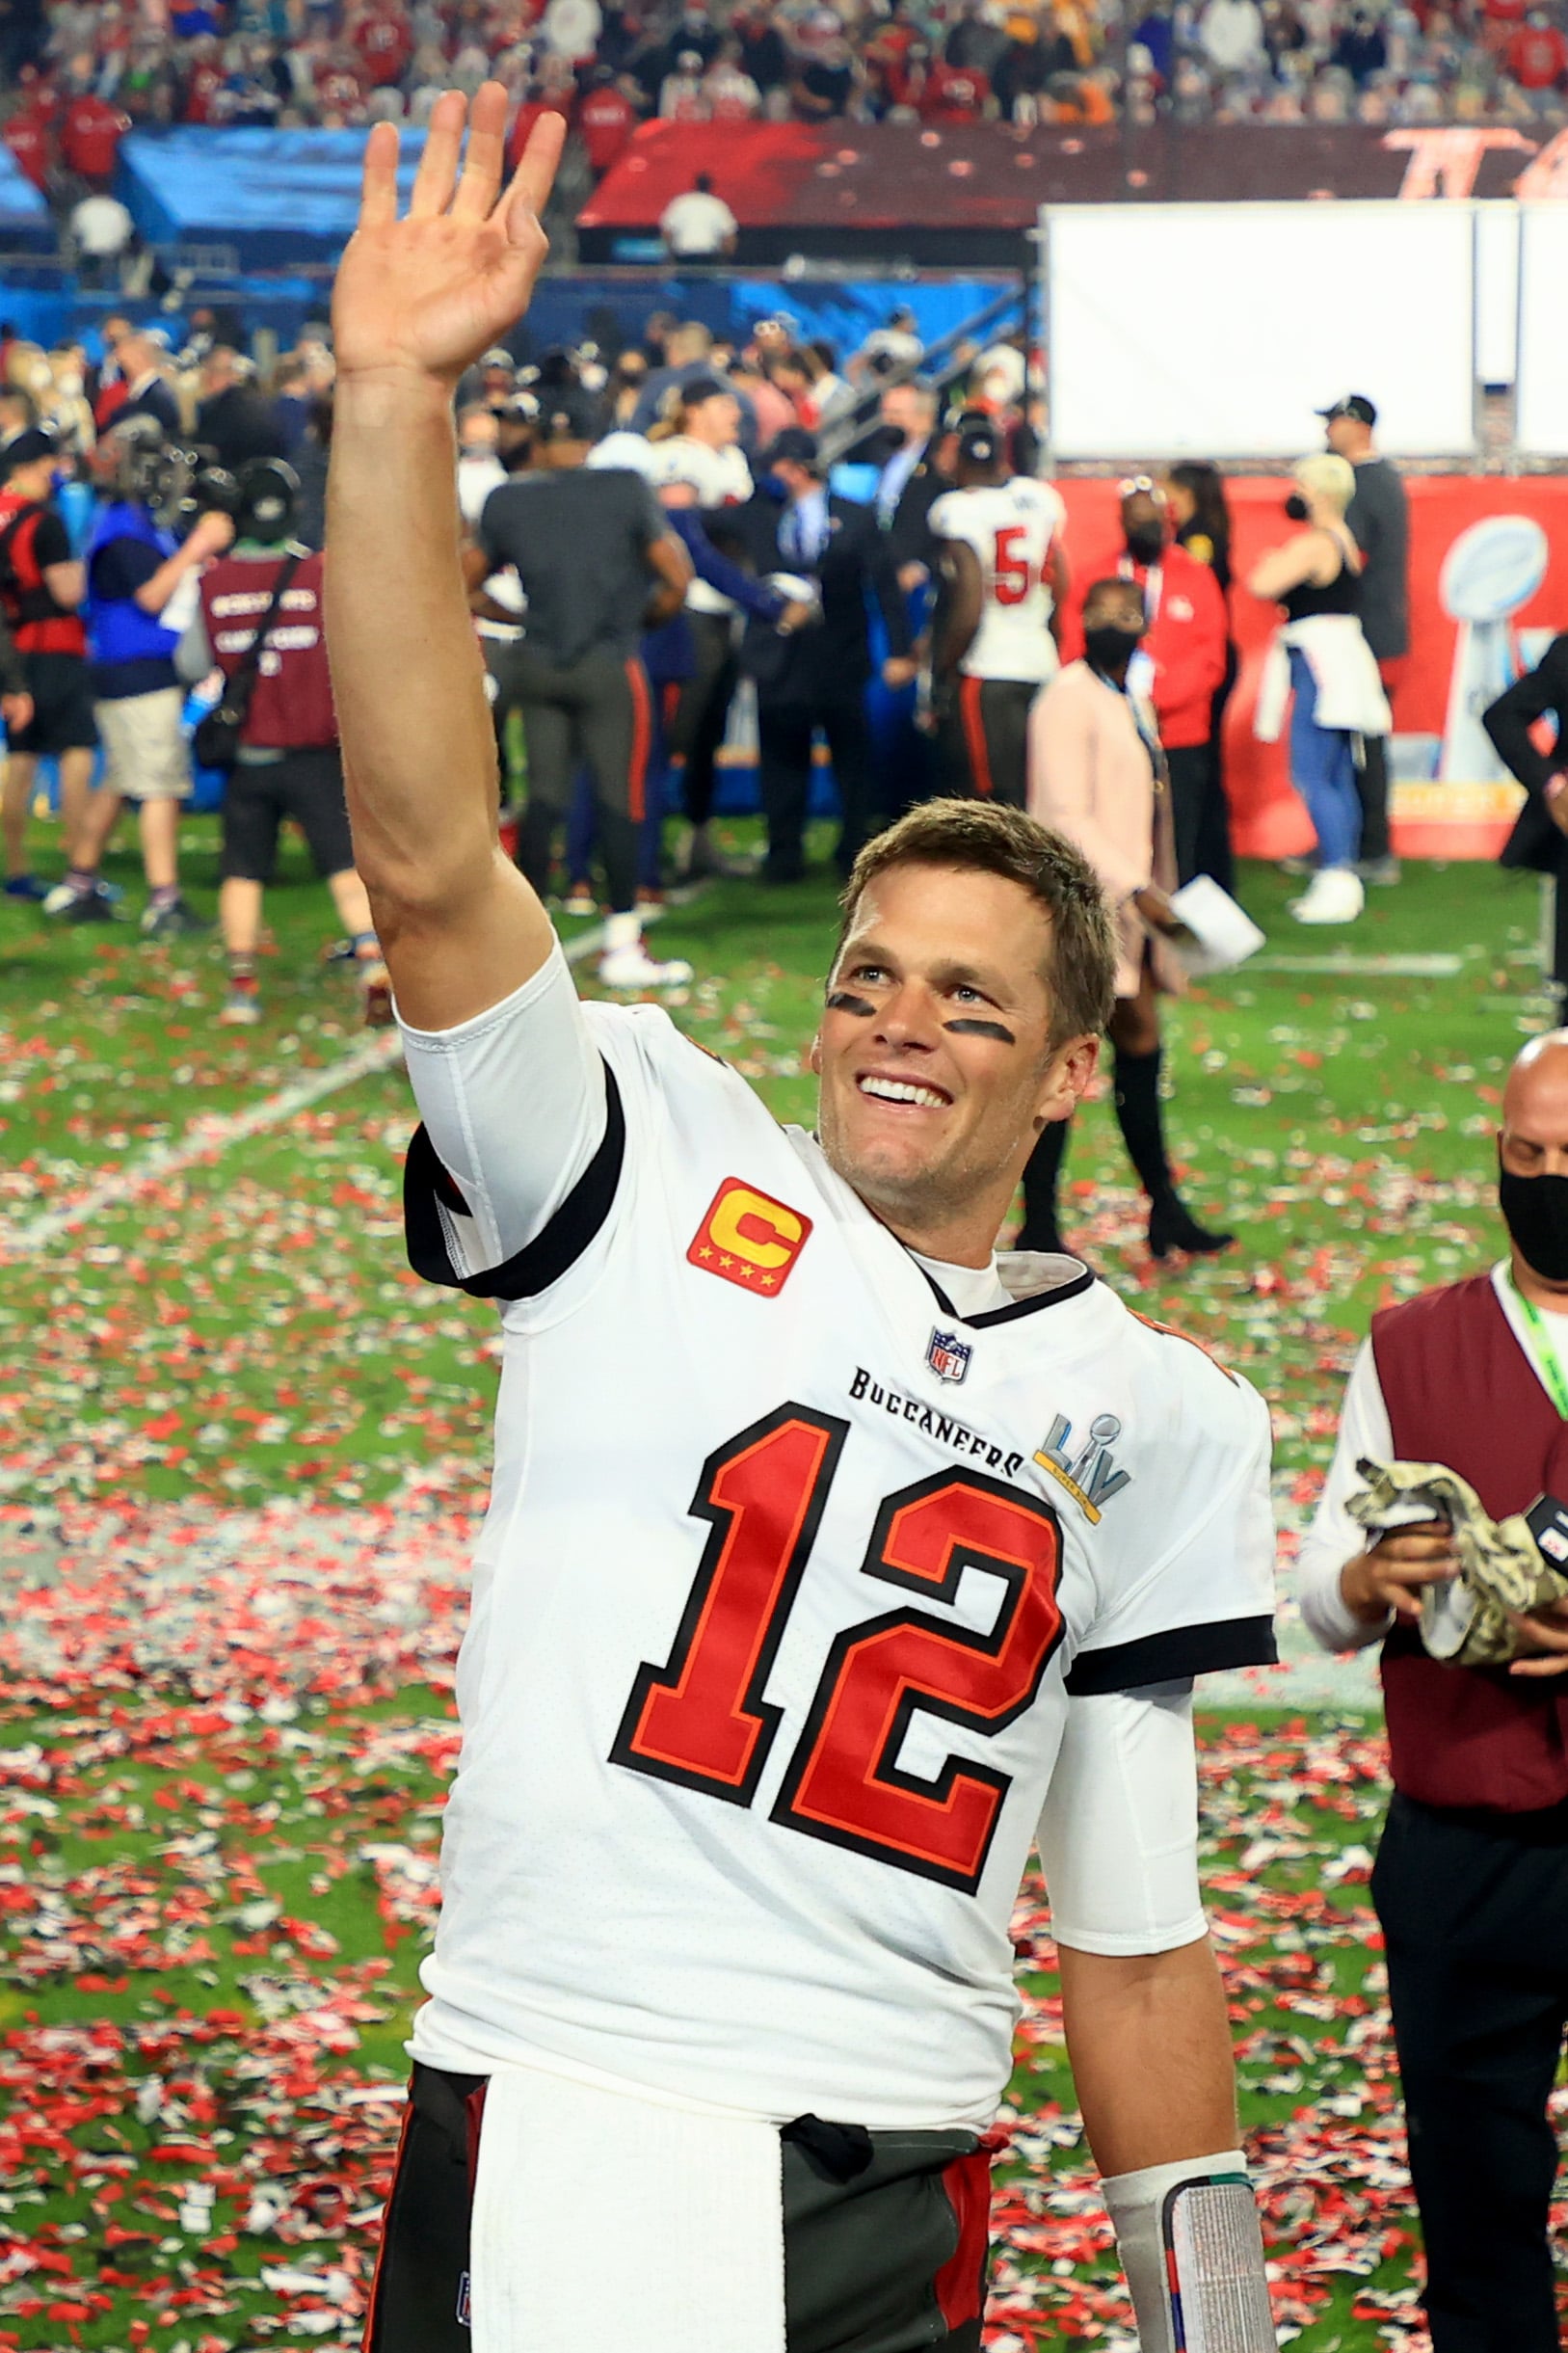 TAMPA, FLORIDA - FEBRUARY 07: Tom Brady #12 of the Tampa Bay Buccaneers celebrates after defeating the Kansas City Chiefs in Super Bowl LV at Raymond James Stadium on February 07, 2021 in Tampa, Florida. The Buccaneers defeated the Chiefs 31-9. (Photo by Mike Ehrmann/Getty Images)